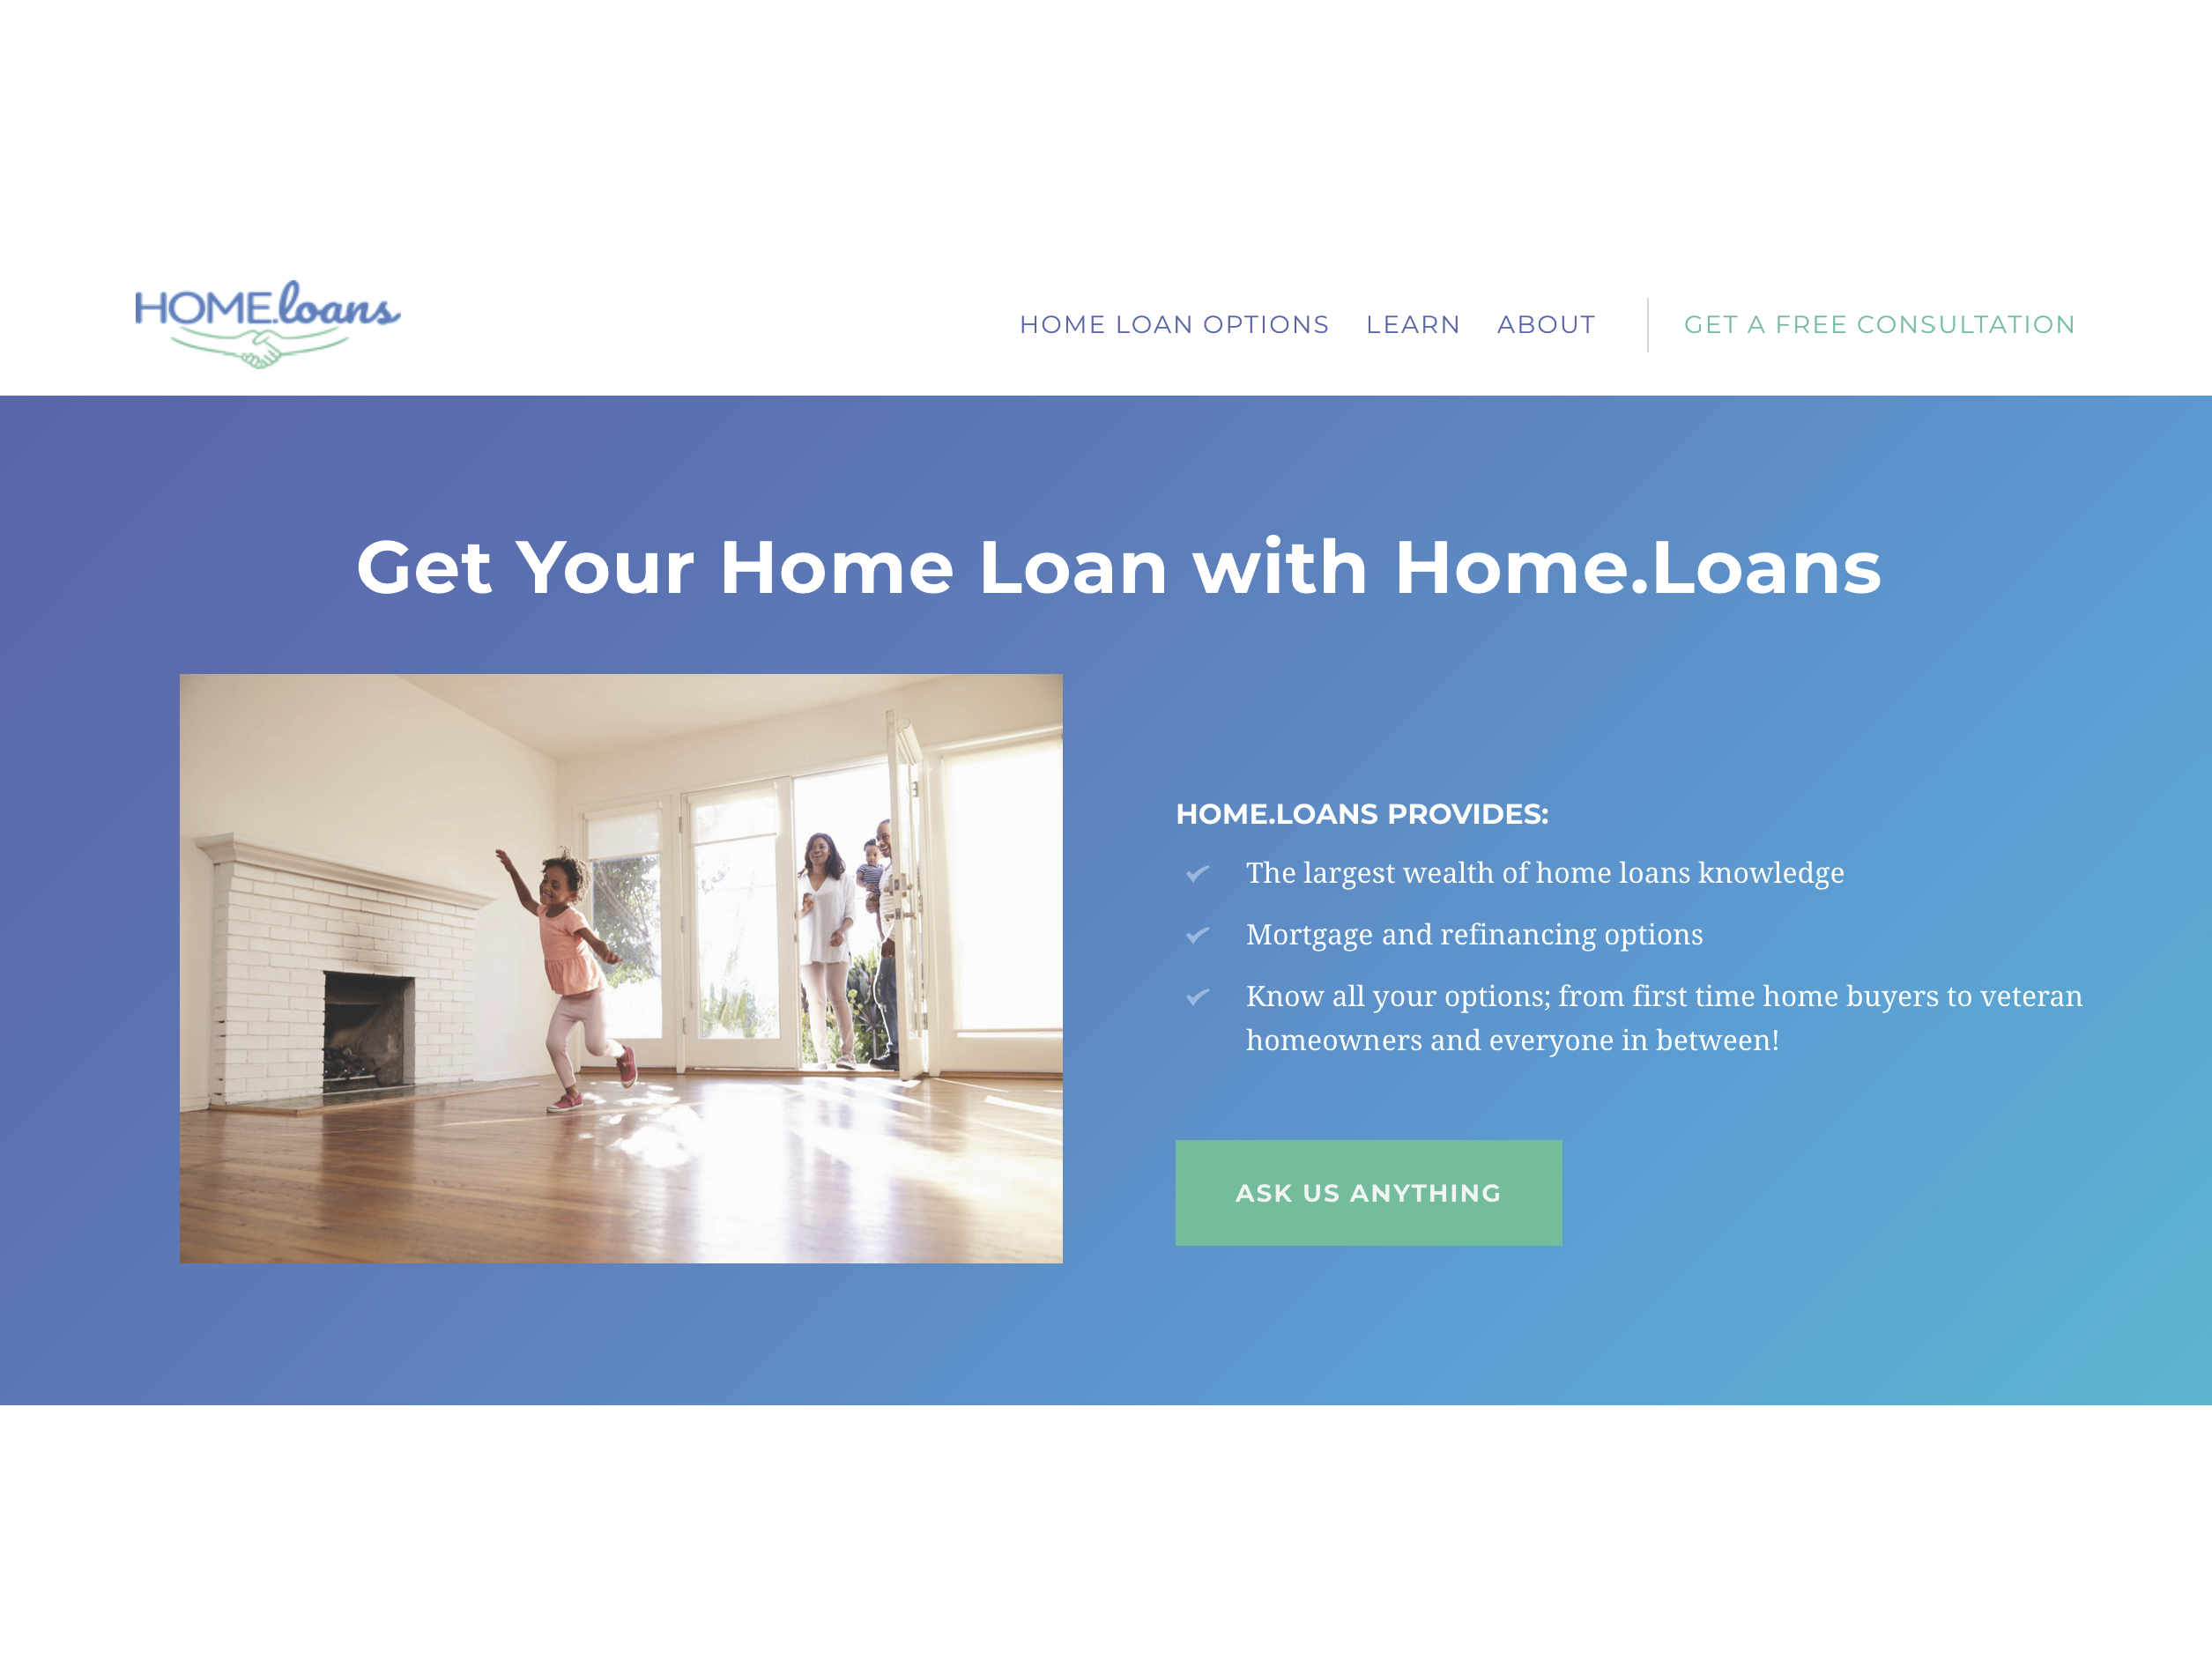 Donuts Sells Www Home Loans Domain Name For 500 000 Donuts News